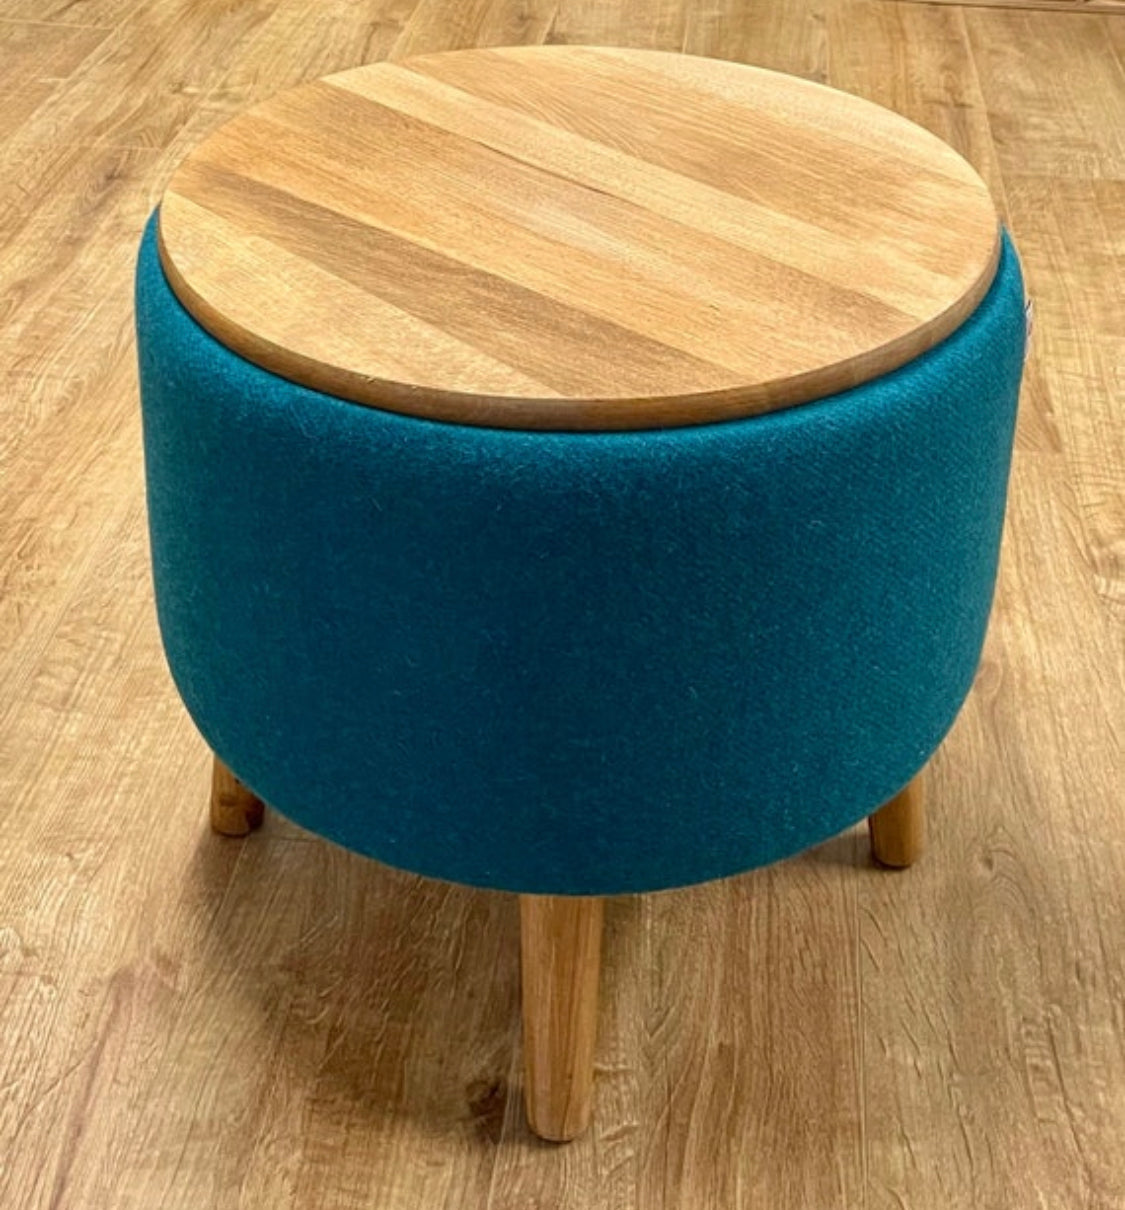 Teal End Table: Harris Tweed with Rustic Wooden Legs and Top